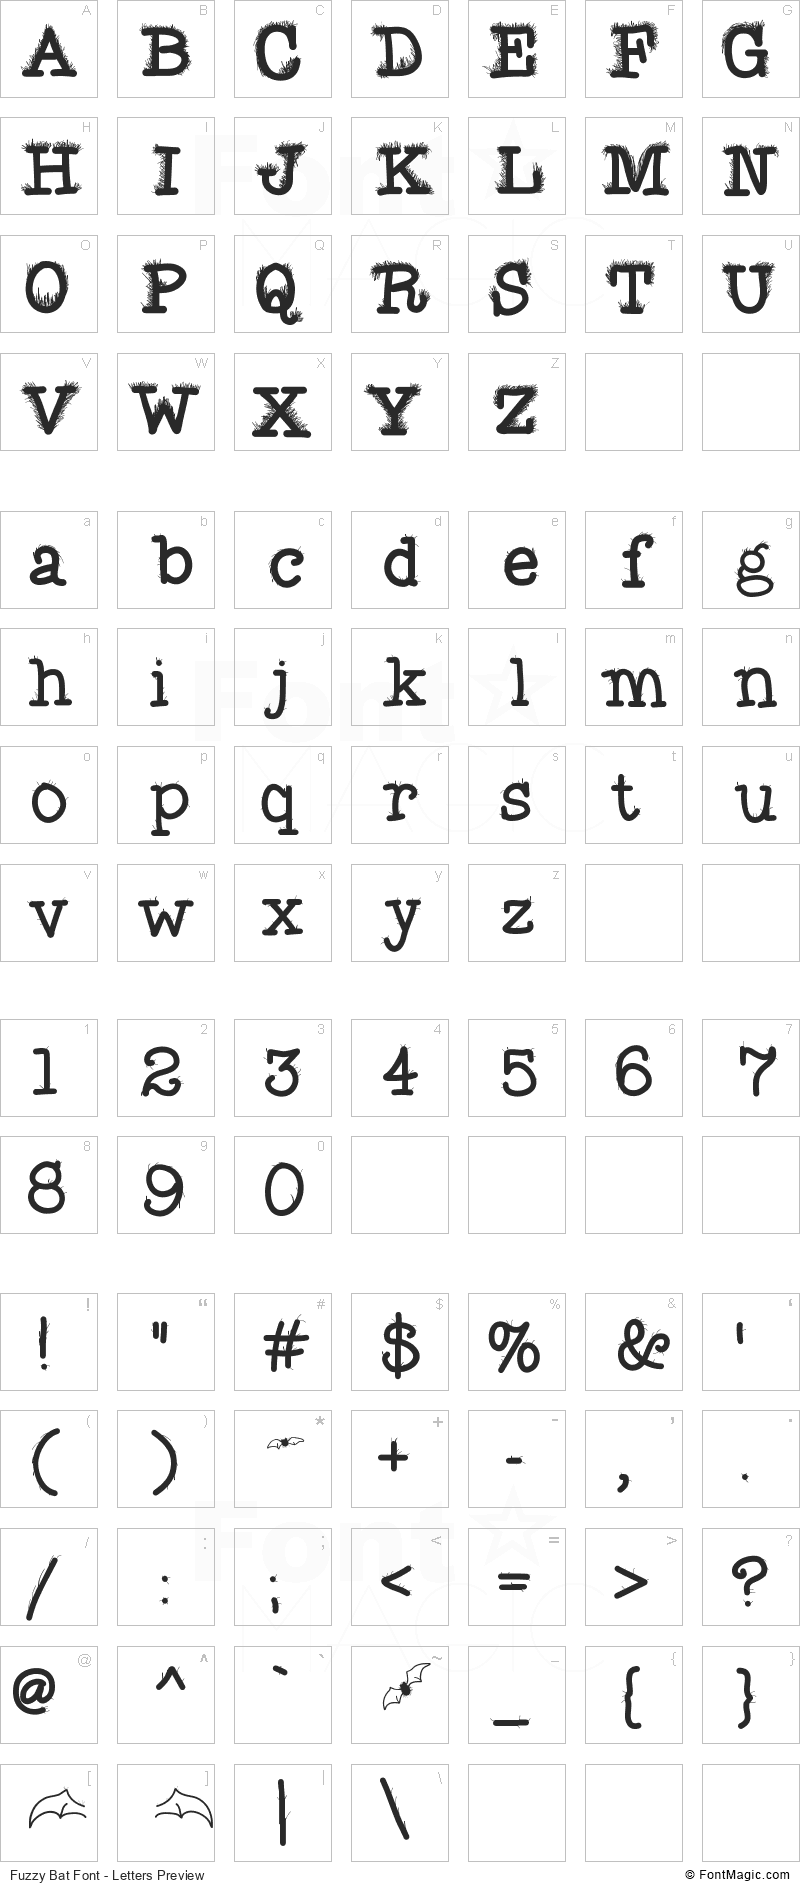 Fuzzy Bat Font - All Latters Preview Chart